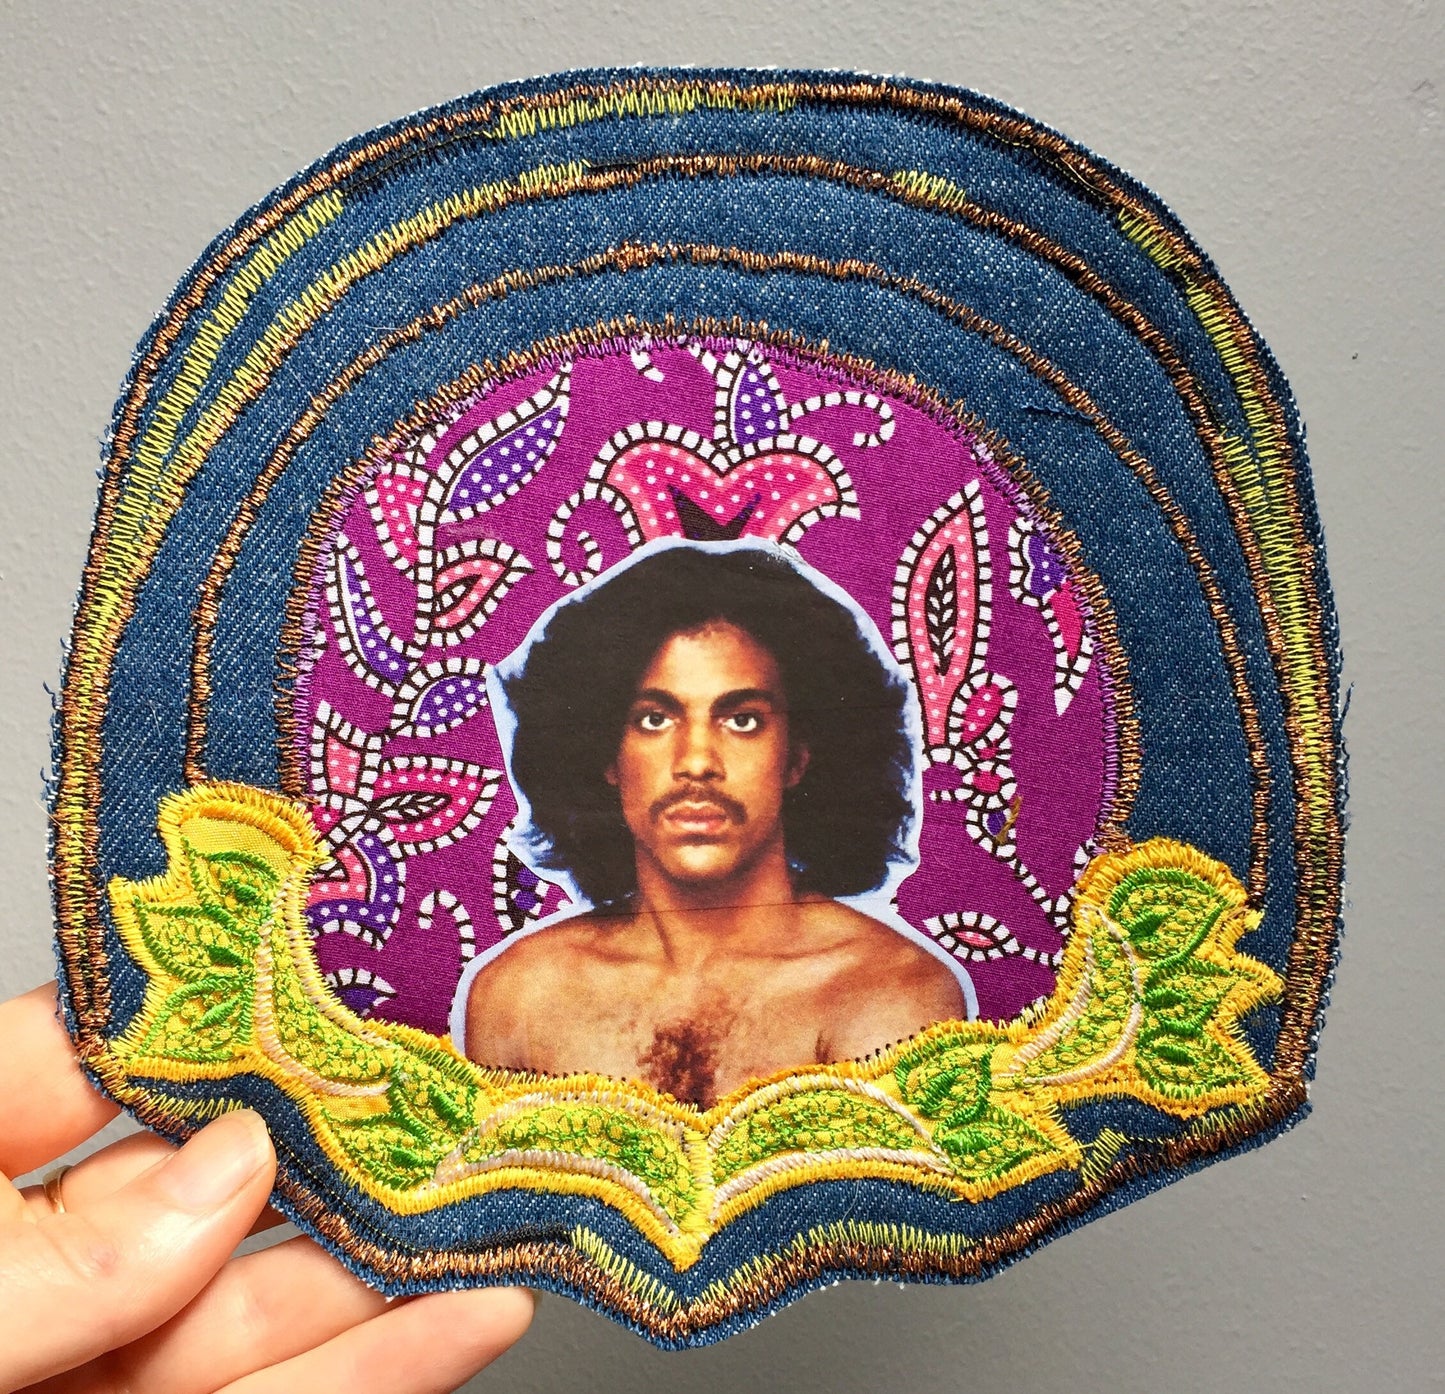 Prince. Handmade Jean Jacket Patch. Vintage Denim and Embroidery